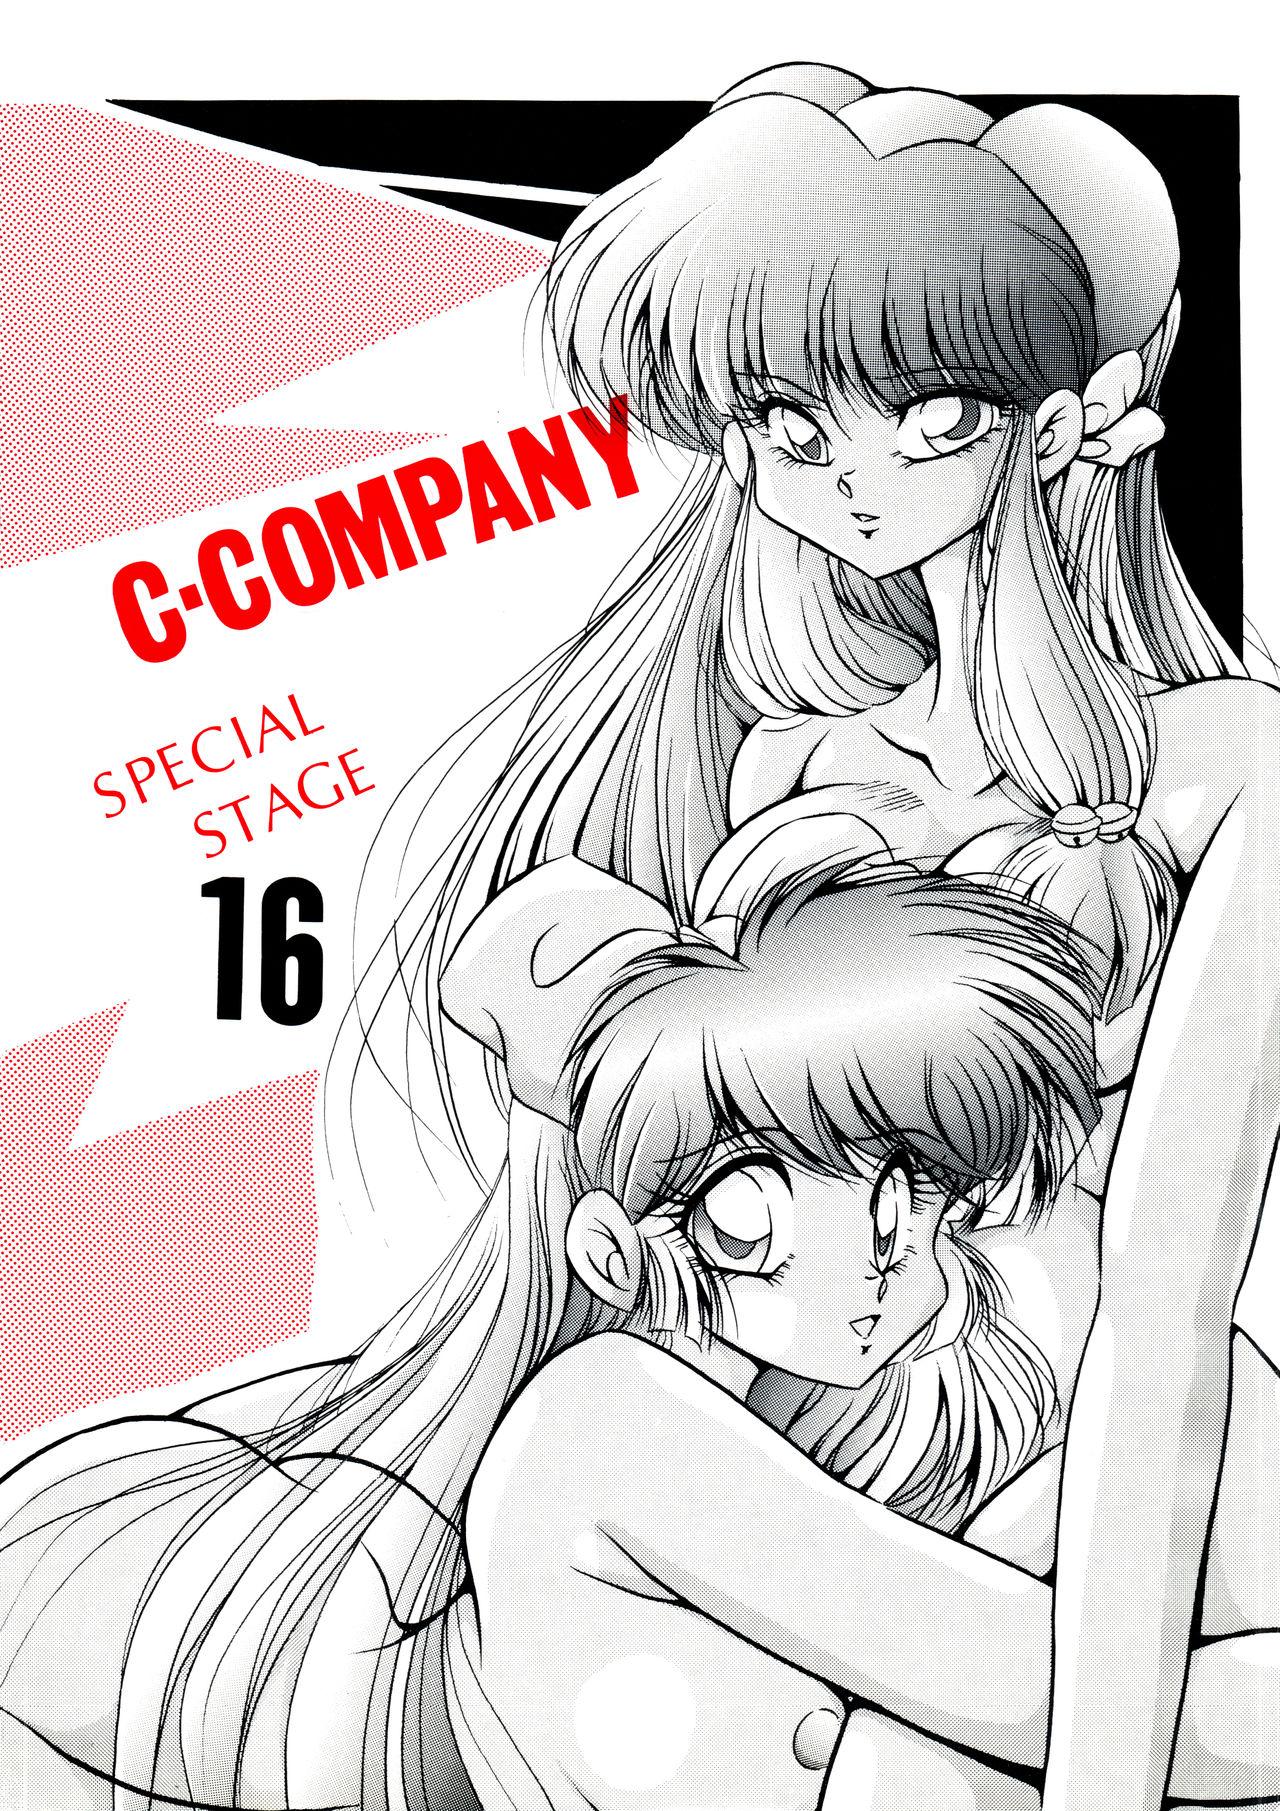 C-COMPANY SPECIAL STAGE 16 0